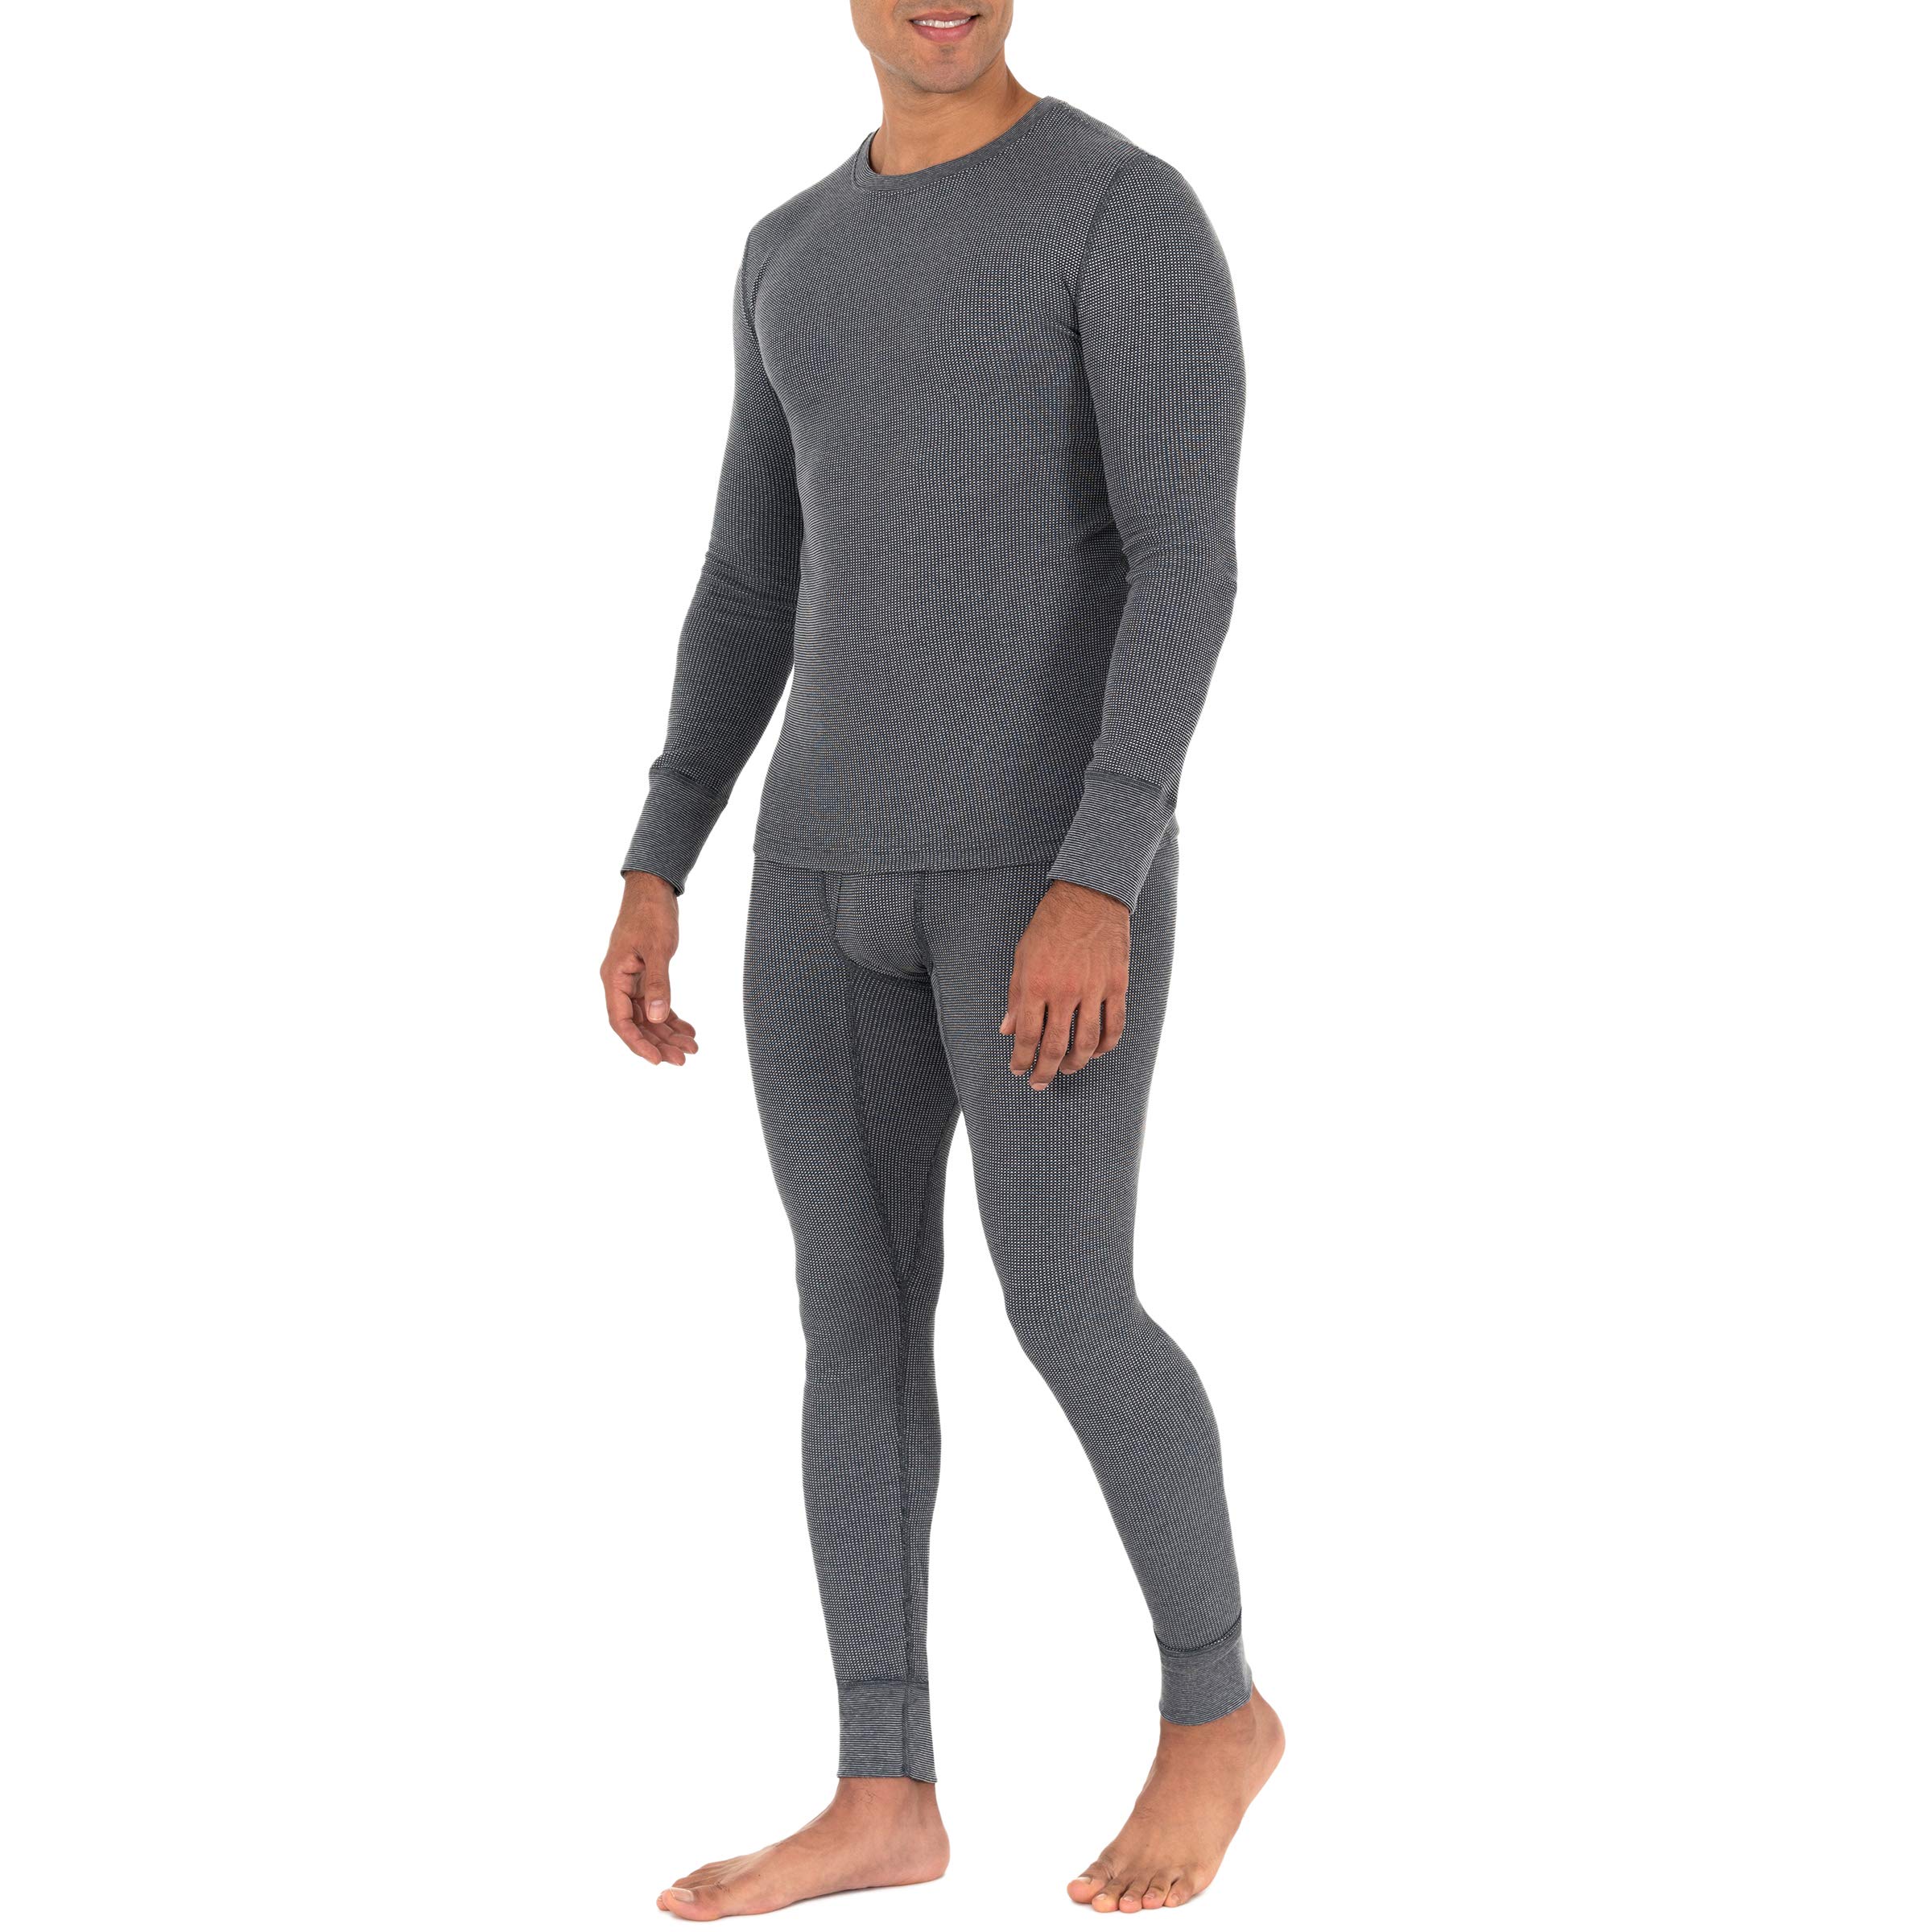 Fruit of the Loom Men's Recycled Waffle Thermal Underwear Set (Top and Bottom), Greystone Heather, 5X-Large